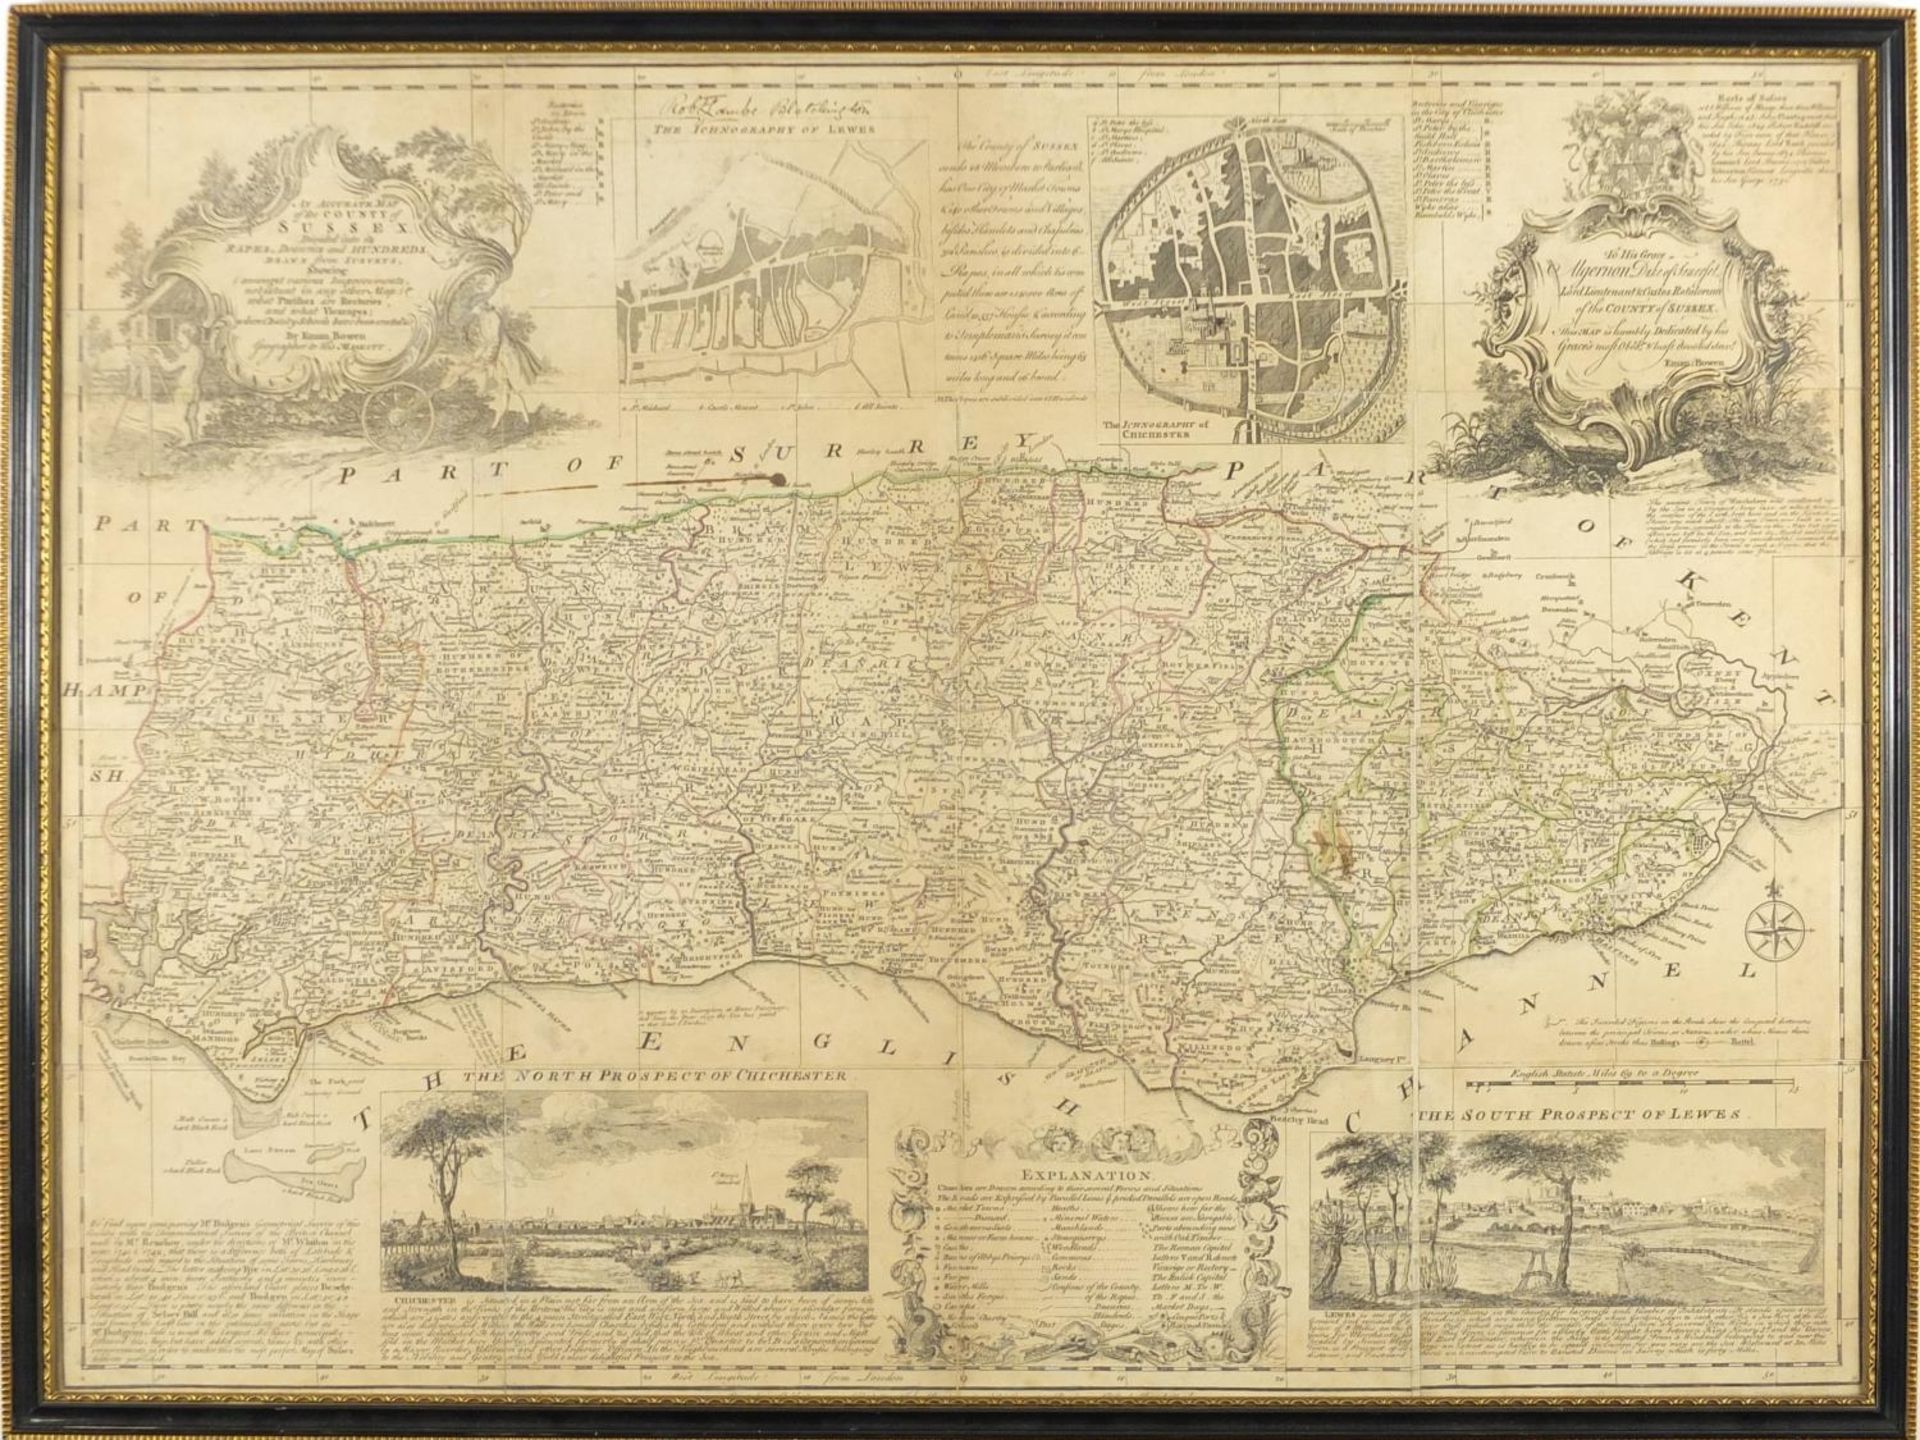 Antique map of the county of Sussex by Emmanuel Bowen, framed, 70cm x 51.5cm - Image 2 of 3